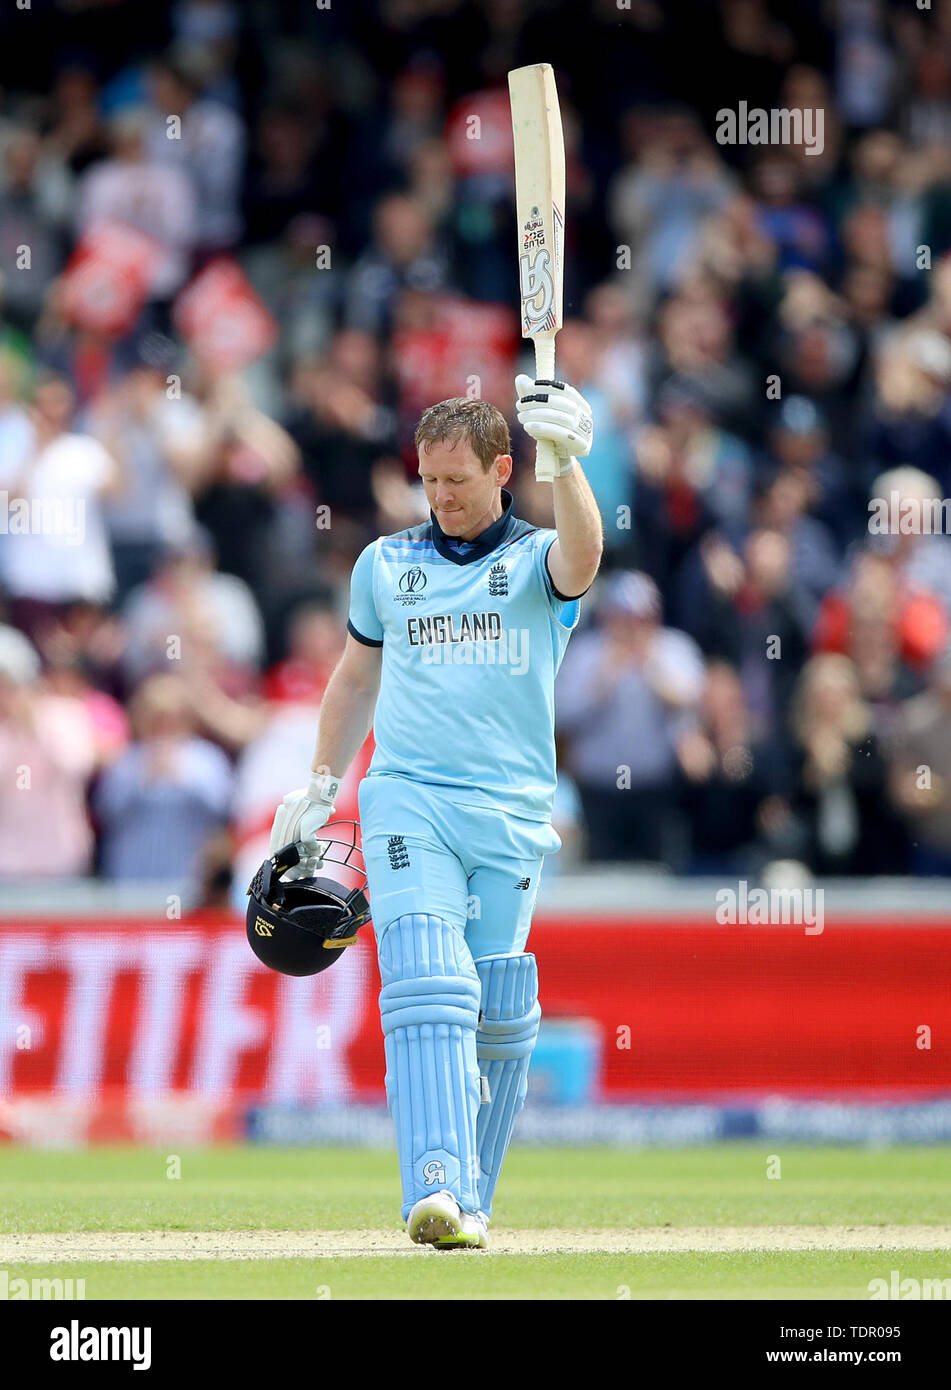 England's Eoin Morgan raises his bat after reaching a century during the ICC Cricket World Cup group stage match at Old Trafford, Manchester. Stock Photo